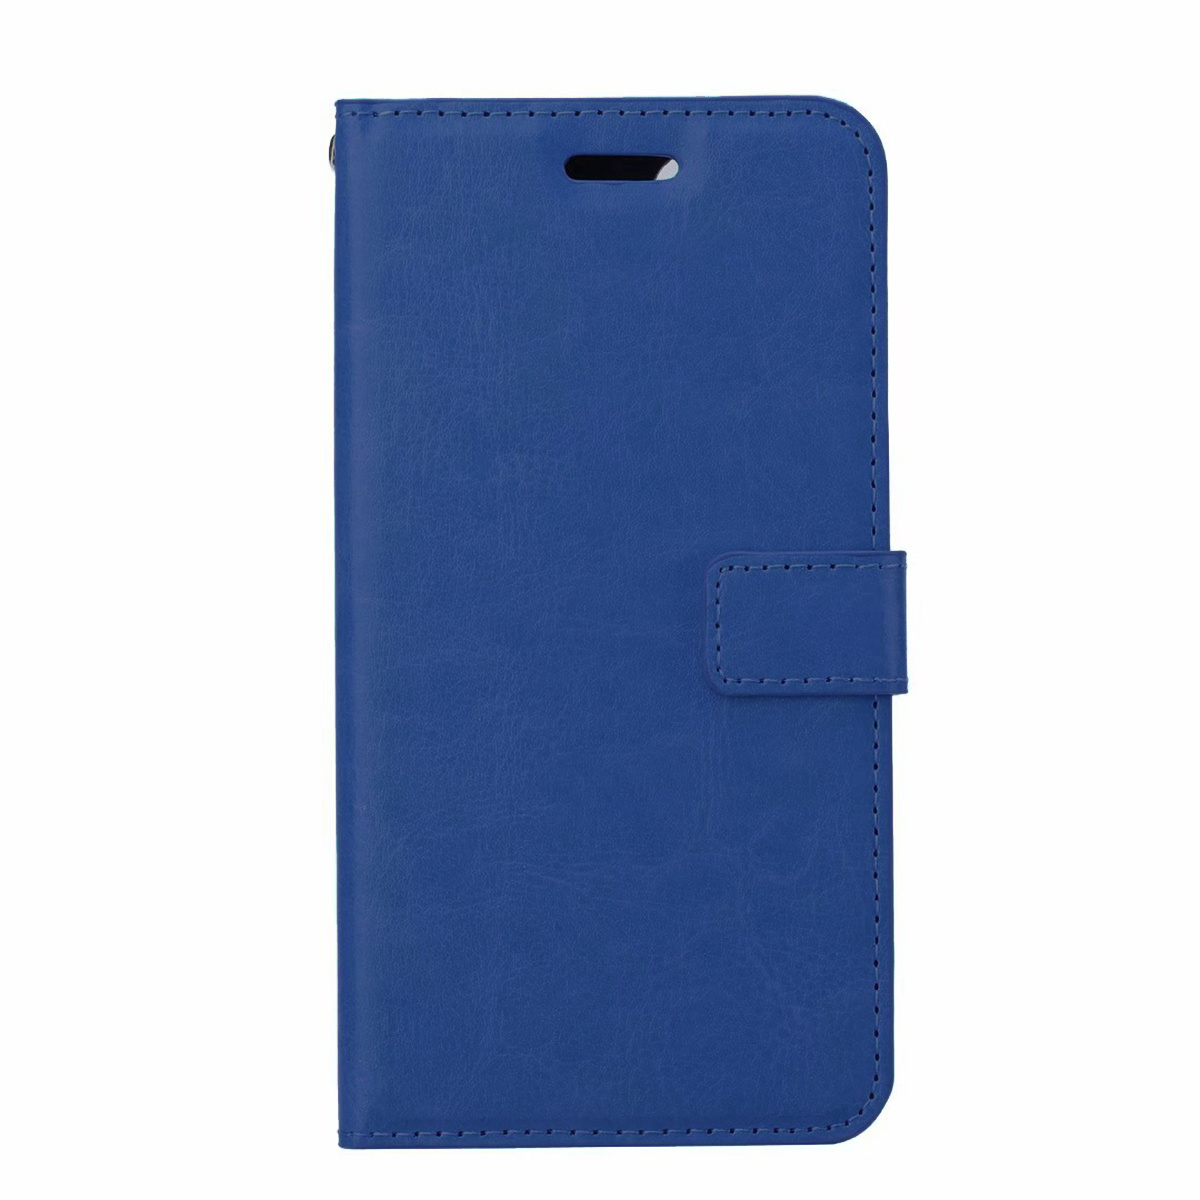 Nomfy Hoes voor iPhone 11 Pro Max Hoes Bookcase Flipcase Book Cover - Hoes voor iPhone 11 Pro Max Hoesje Book Case - Donker Blauw